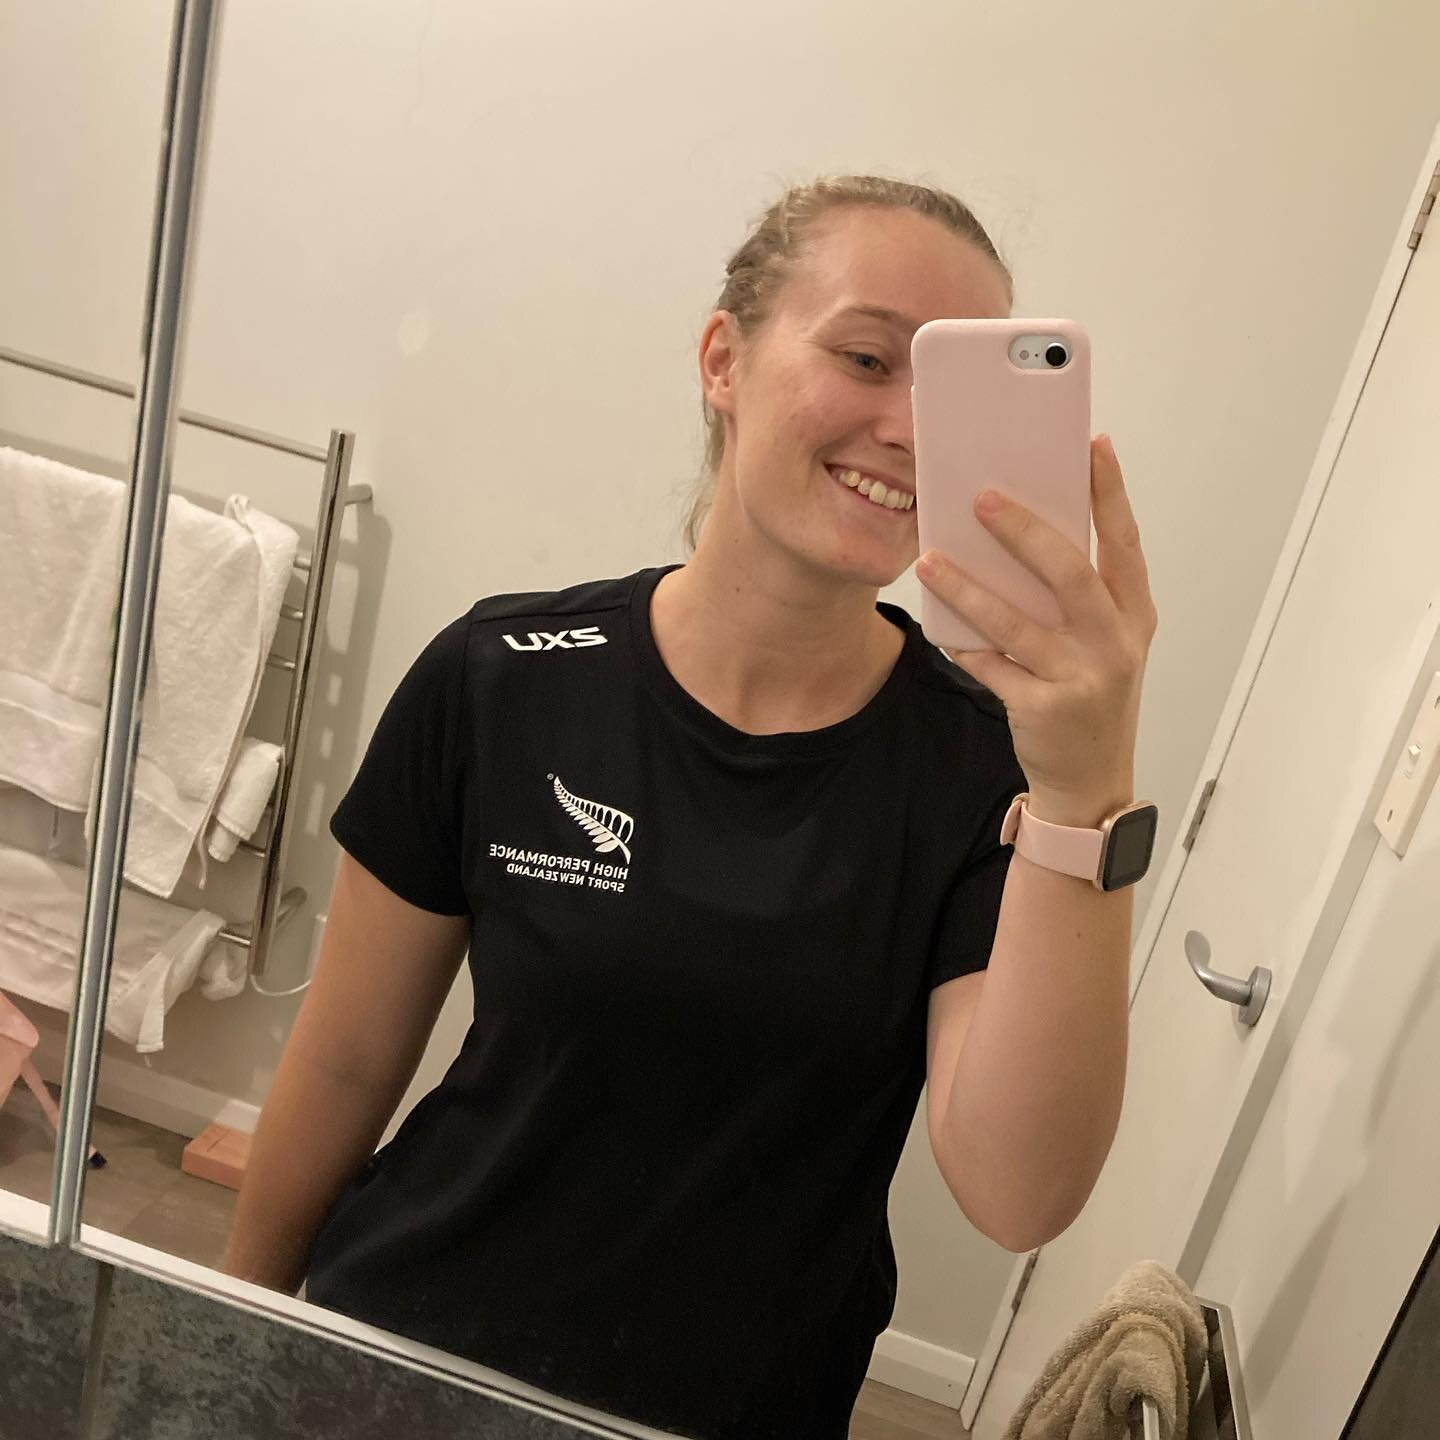 A couple months in &amp; loving every single moment of my Strength &amp; Conditioning internship with @hpsportnz 🖤🌿

I'm so grateful for this awesome opportunity to learn from some of our elite coaches and athletes! 😍

Pumped for the next few mont